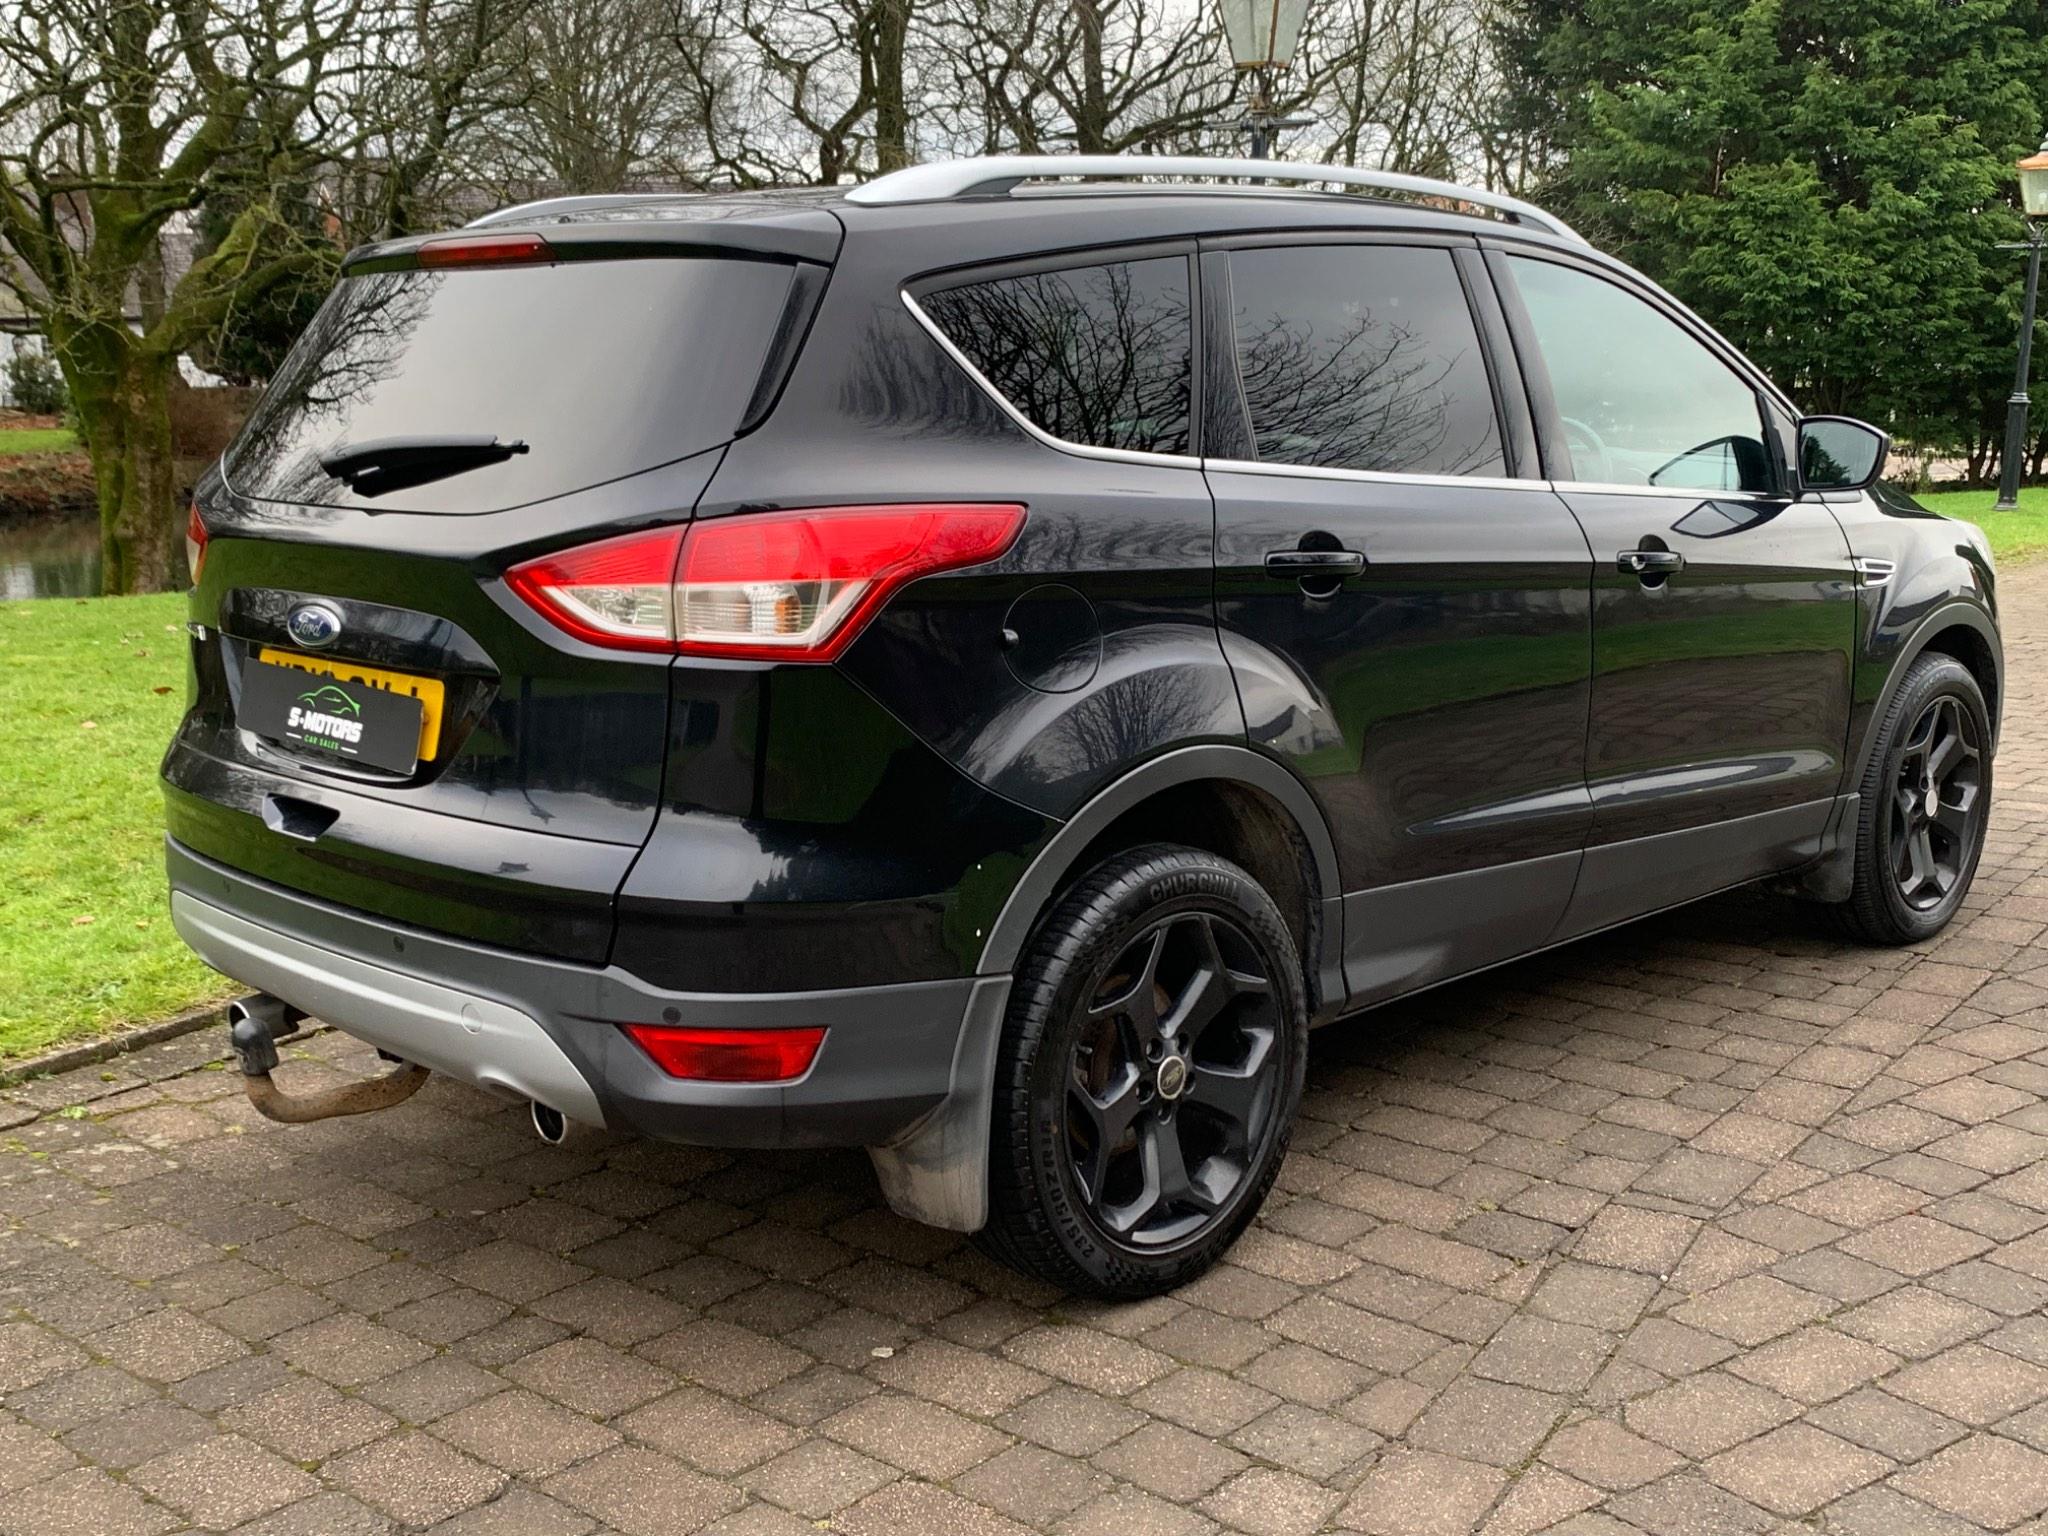 Used Ford Kuga Review - 2013-2020